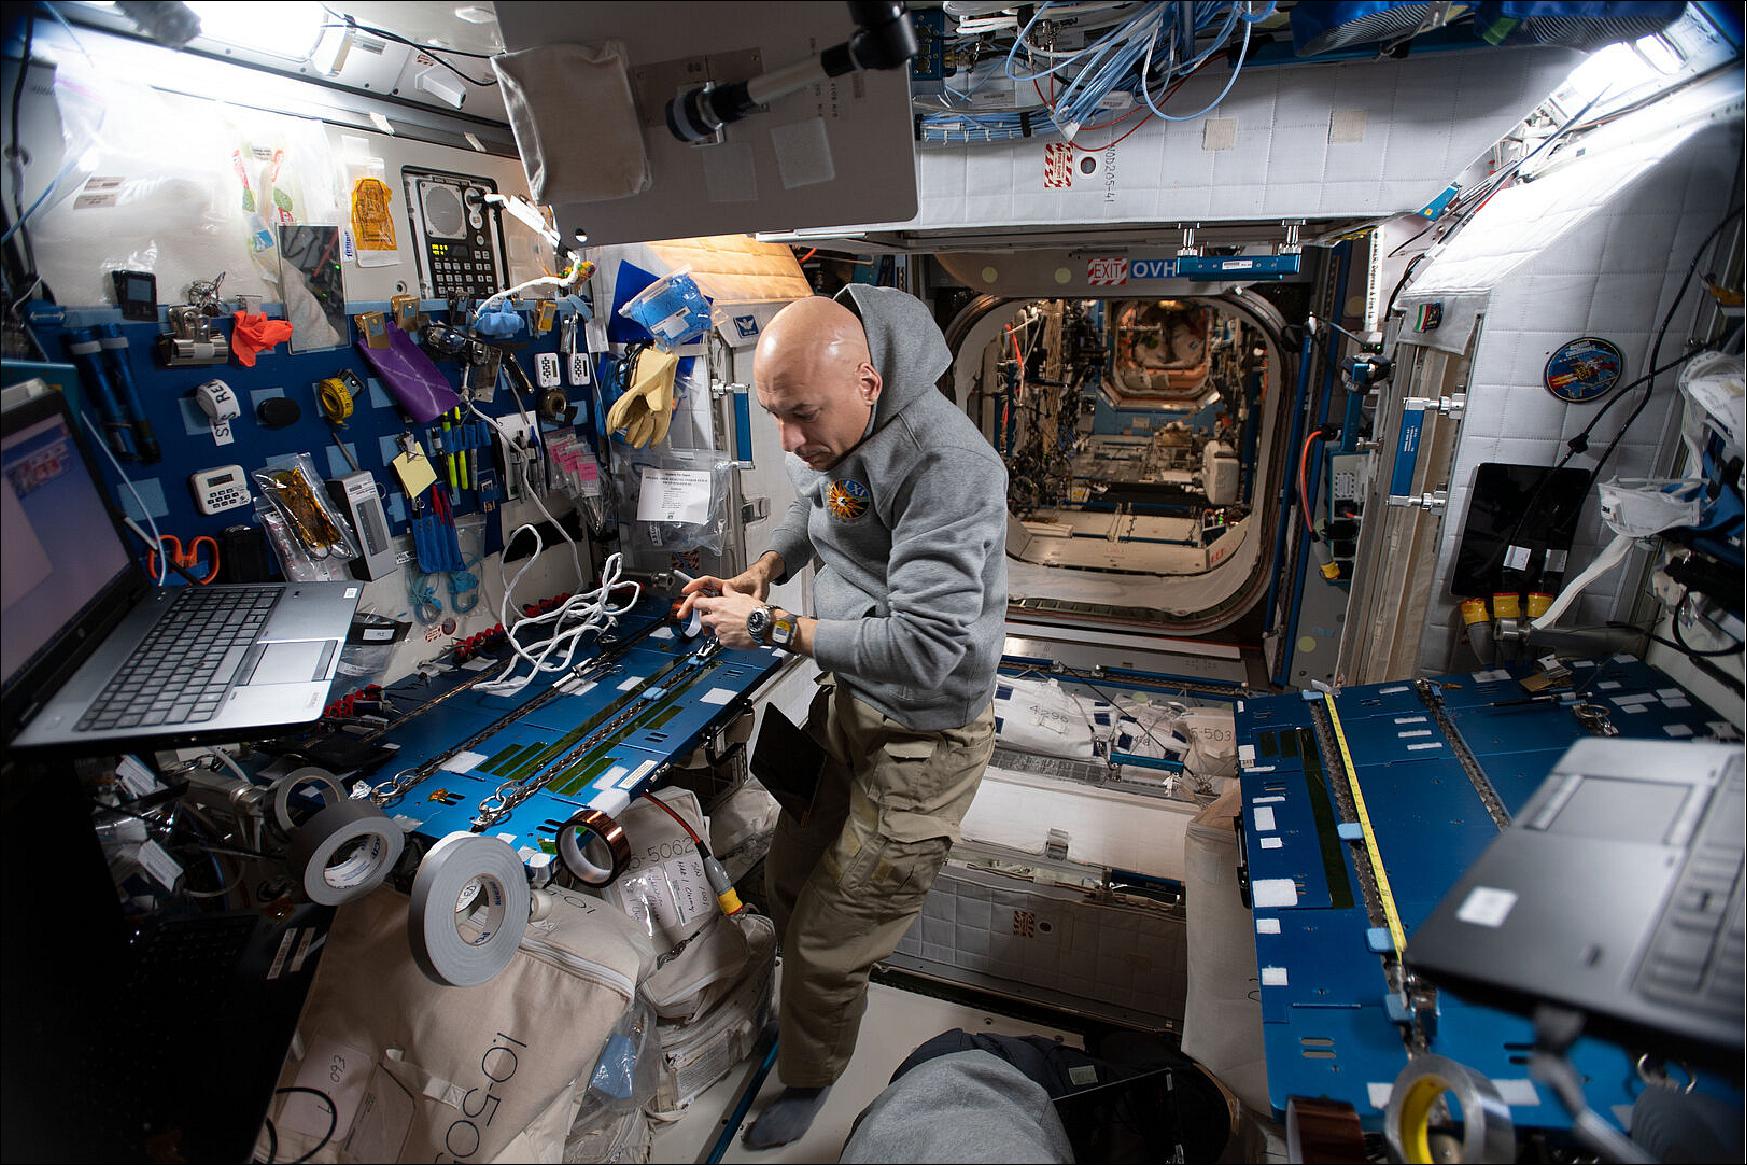 Figure 25: Luca is preparing for his EVA (Extra Vehicular Activity) on 15 November. He is pictured here creating tape flags that will be used to mark tubes during the spacewalks (image credit: ESA/NASA)